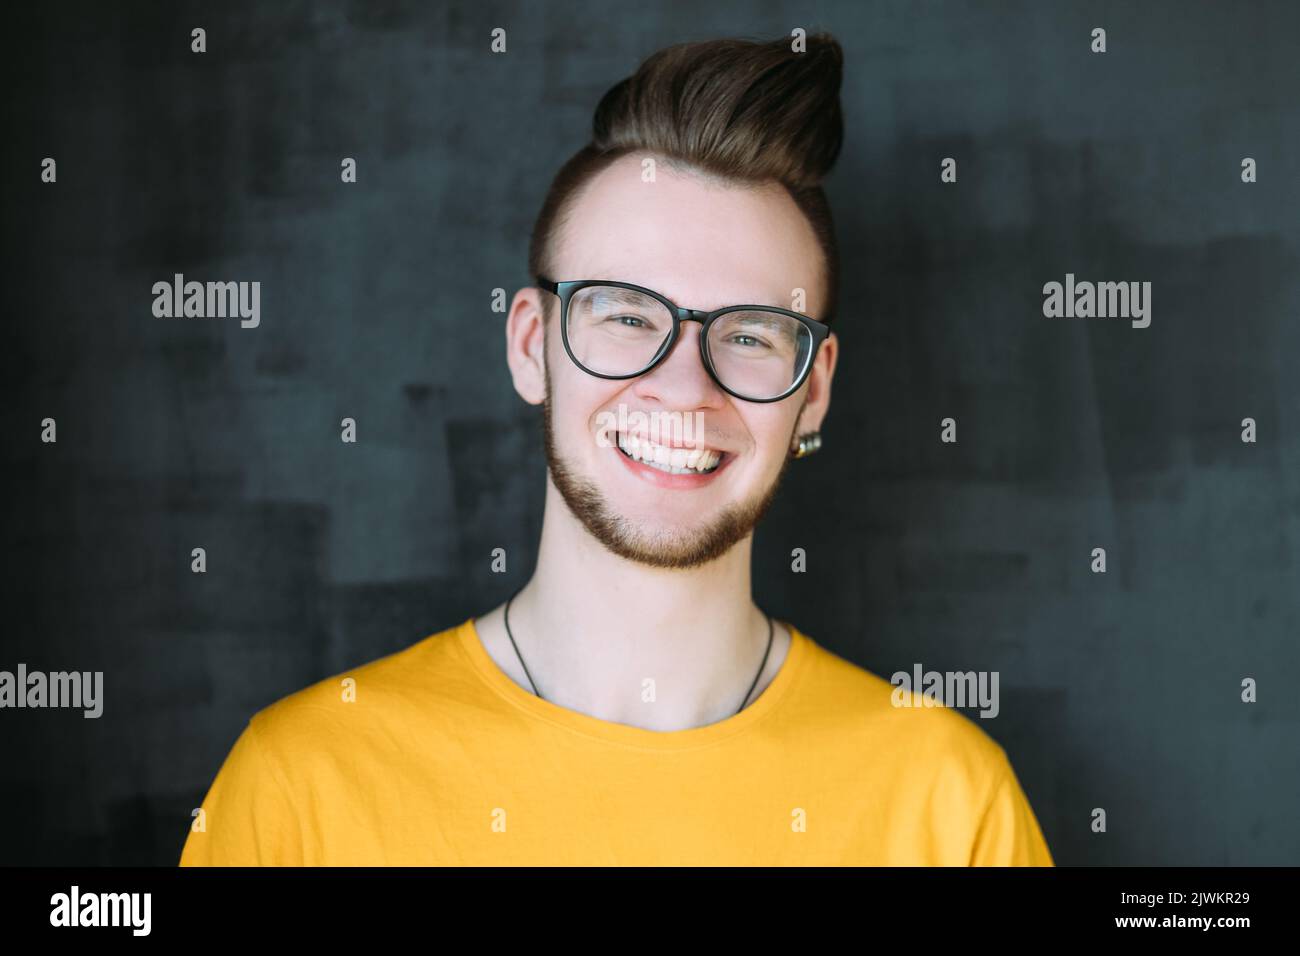 cheerful happy emotional hipster guy portrait Stock Photo